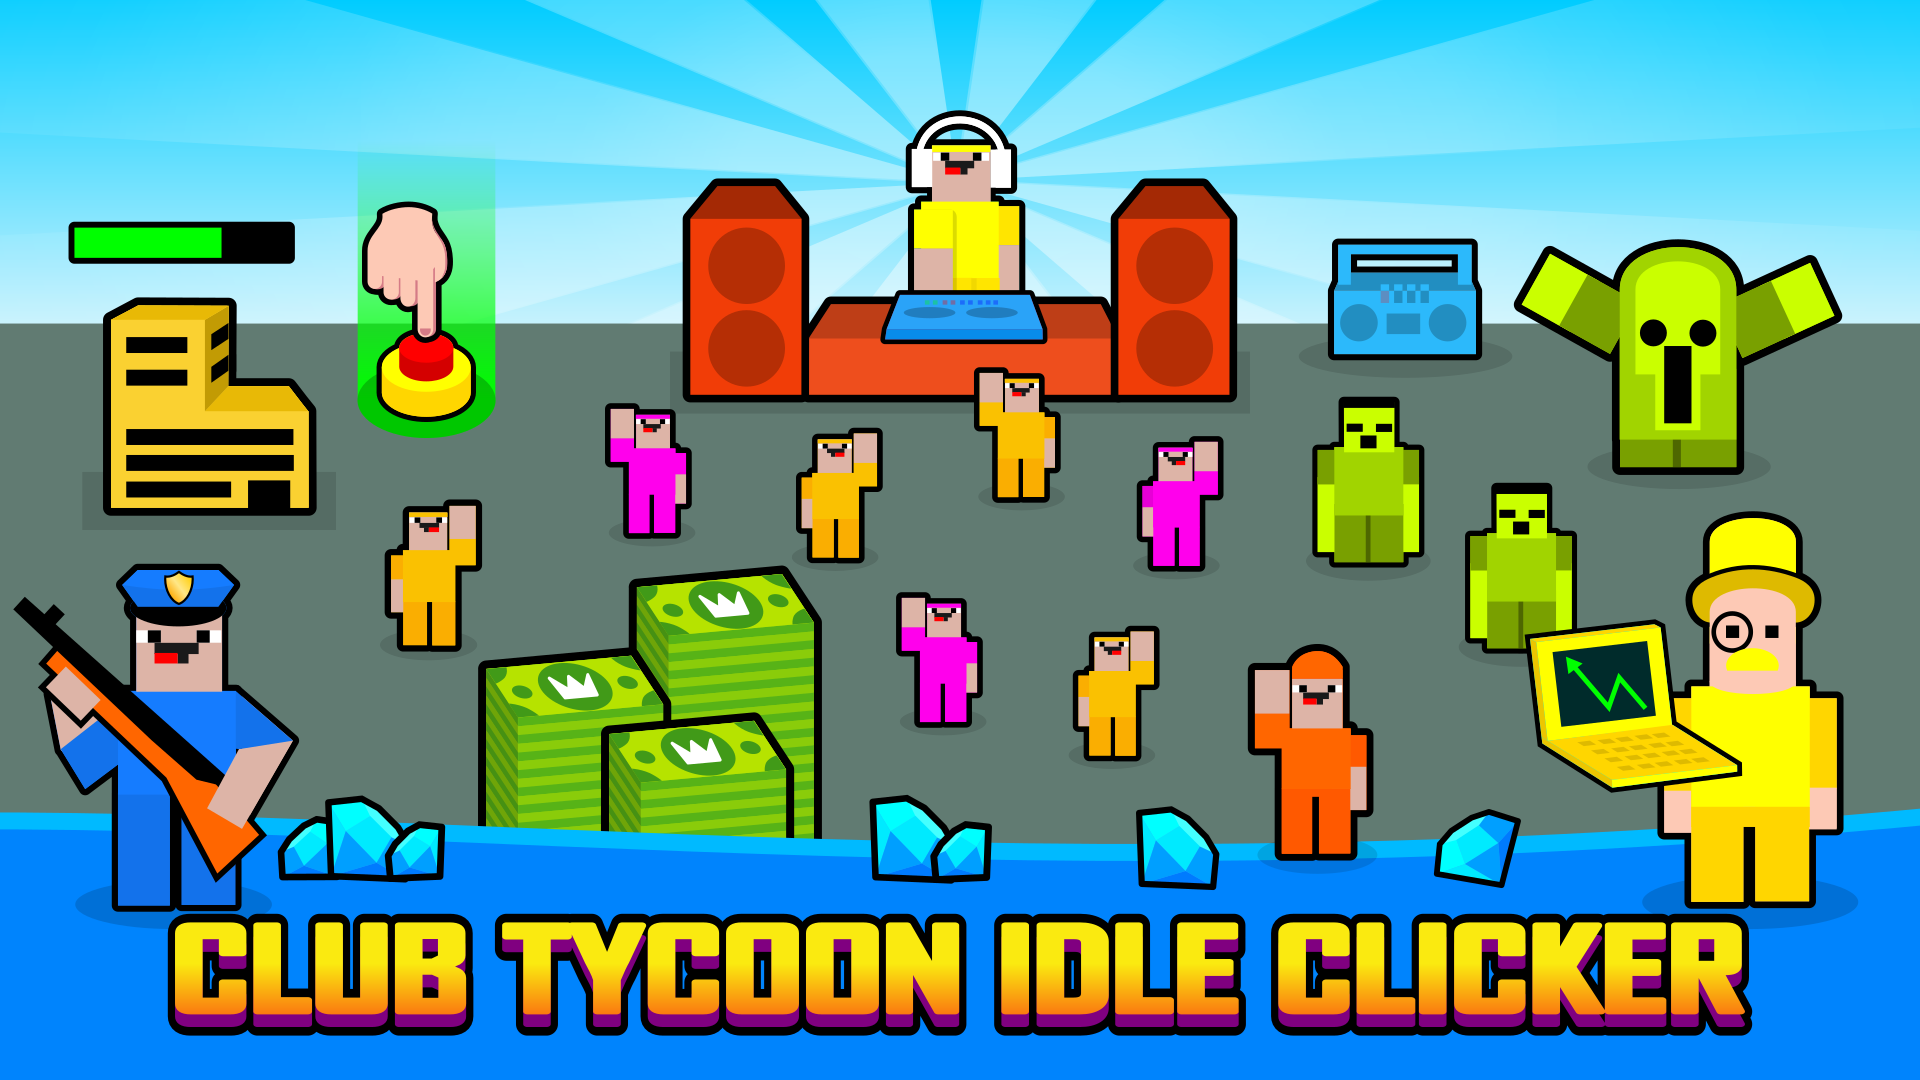 Club Tycoon: Idle Clicker Game Image